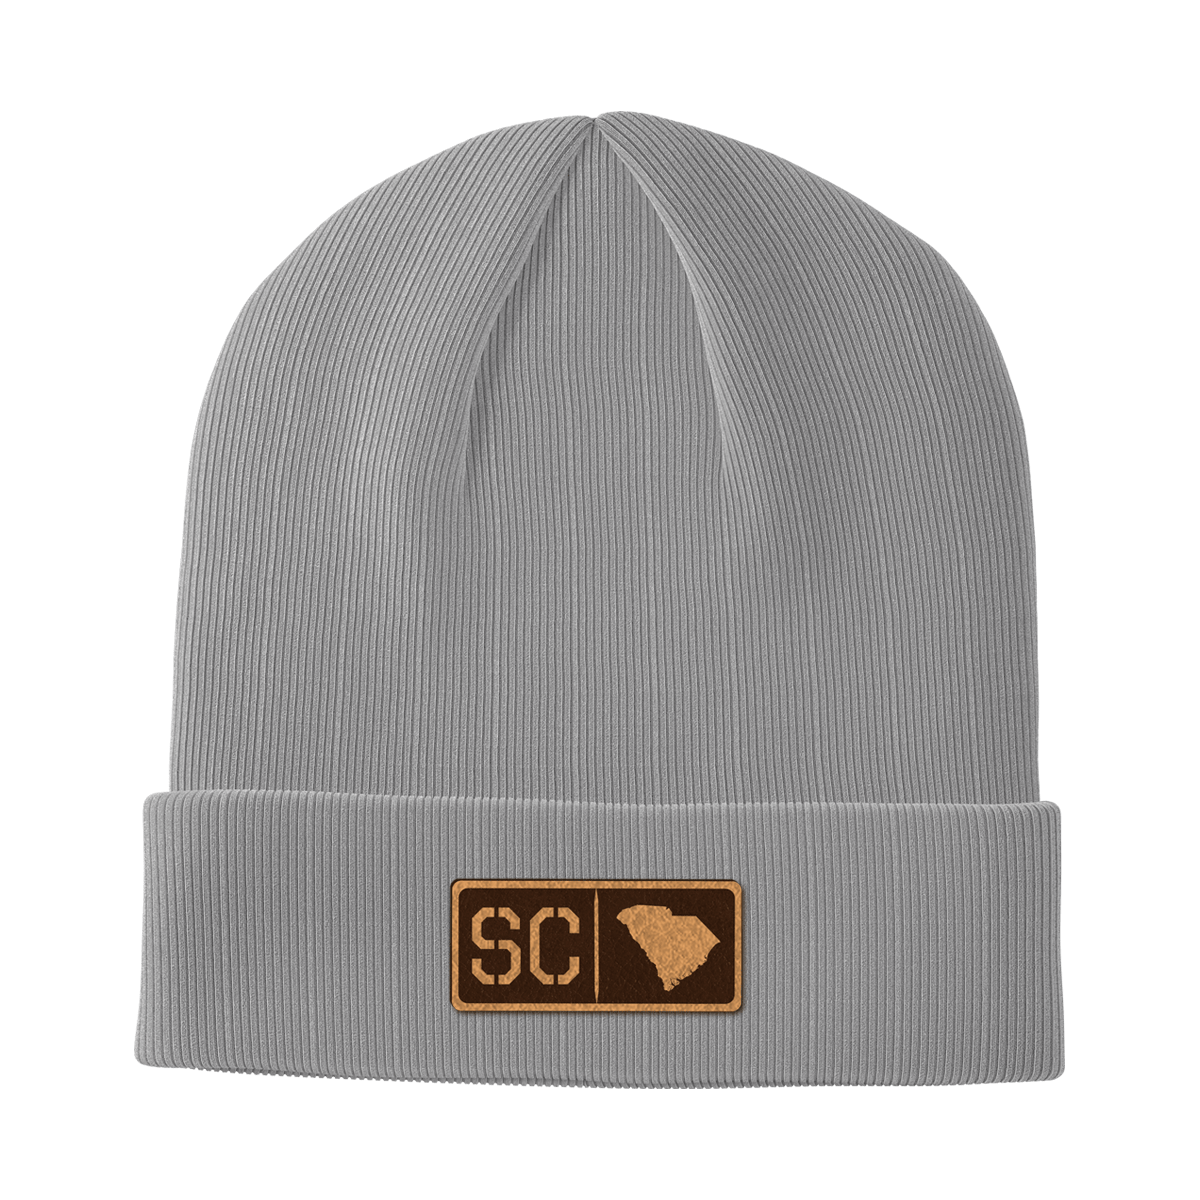 South Carolina Leather Patch Homegrown Beanie